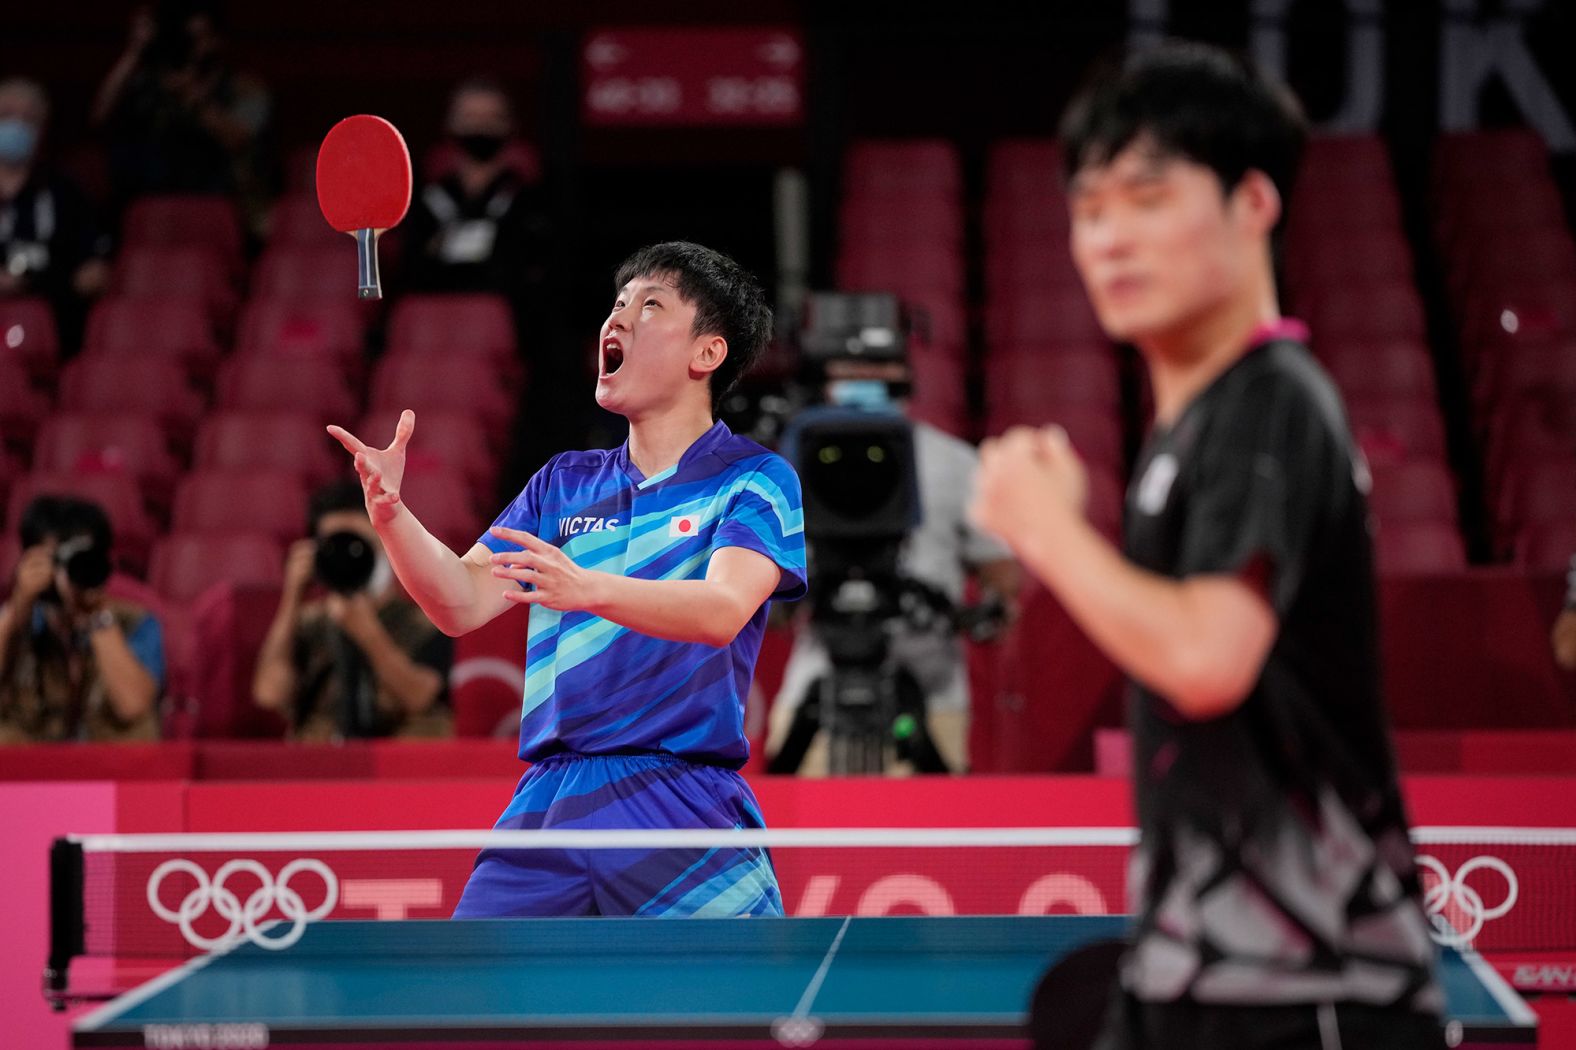 Japan's Tomokazu Harimoto, left, celebrates after defeating South Korea's Jang Woo-jin to win a bronze medal in table tennis on August 6.